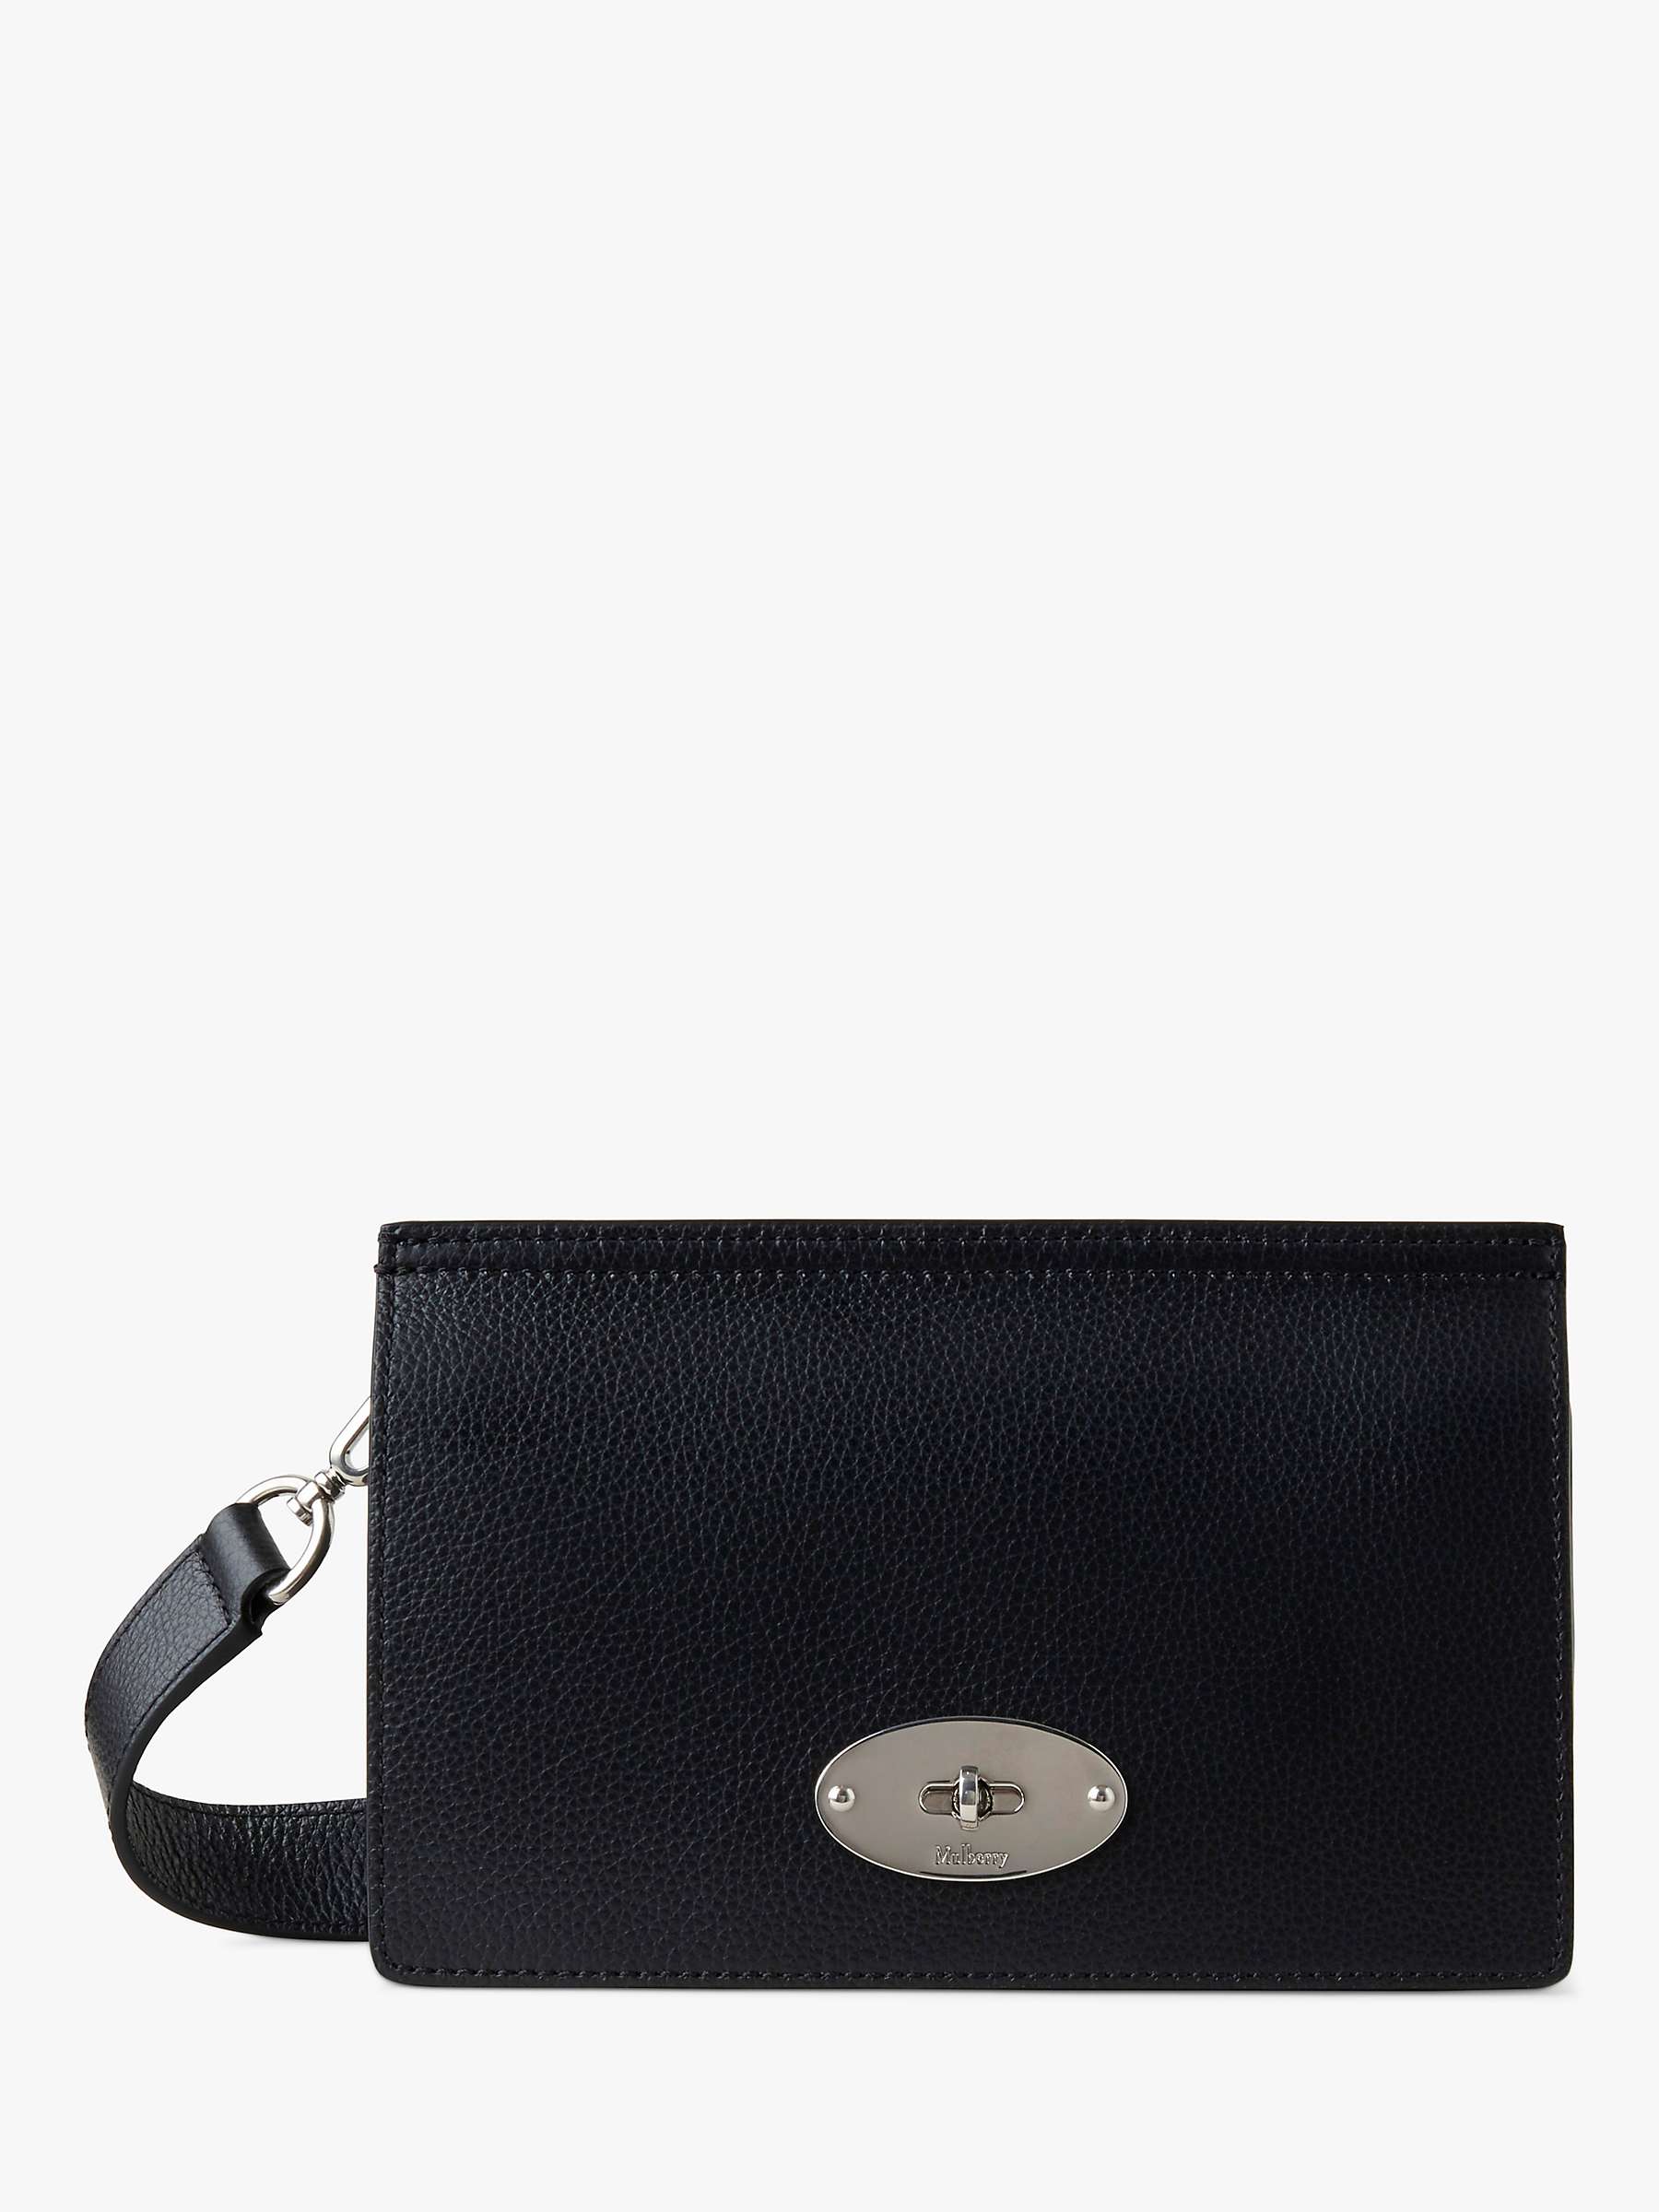 Buy Mulberry East West Antony Small Classic Grain Leather Crossbody Bag, Black Online at johnlewis.com